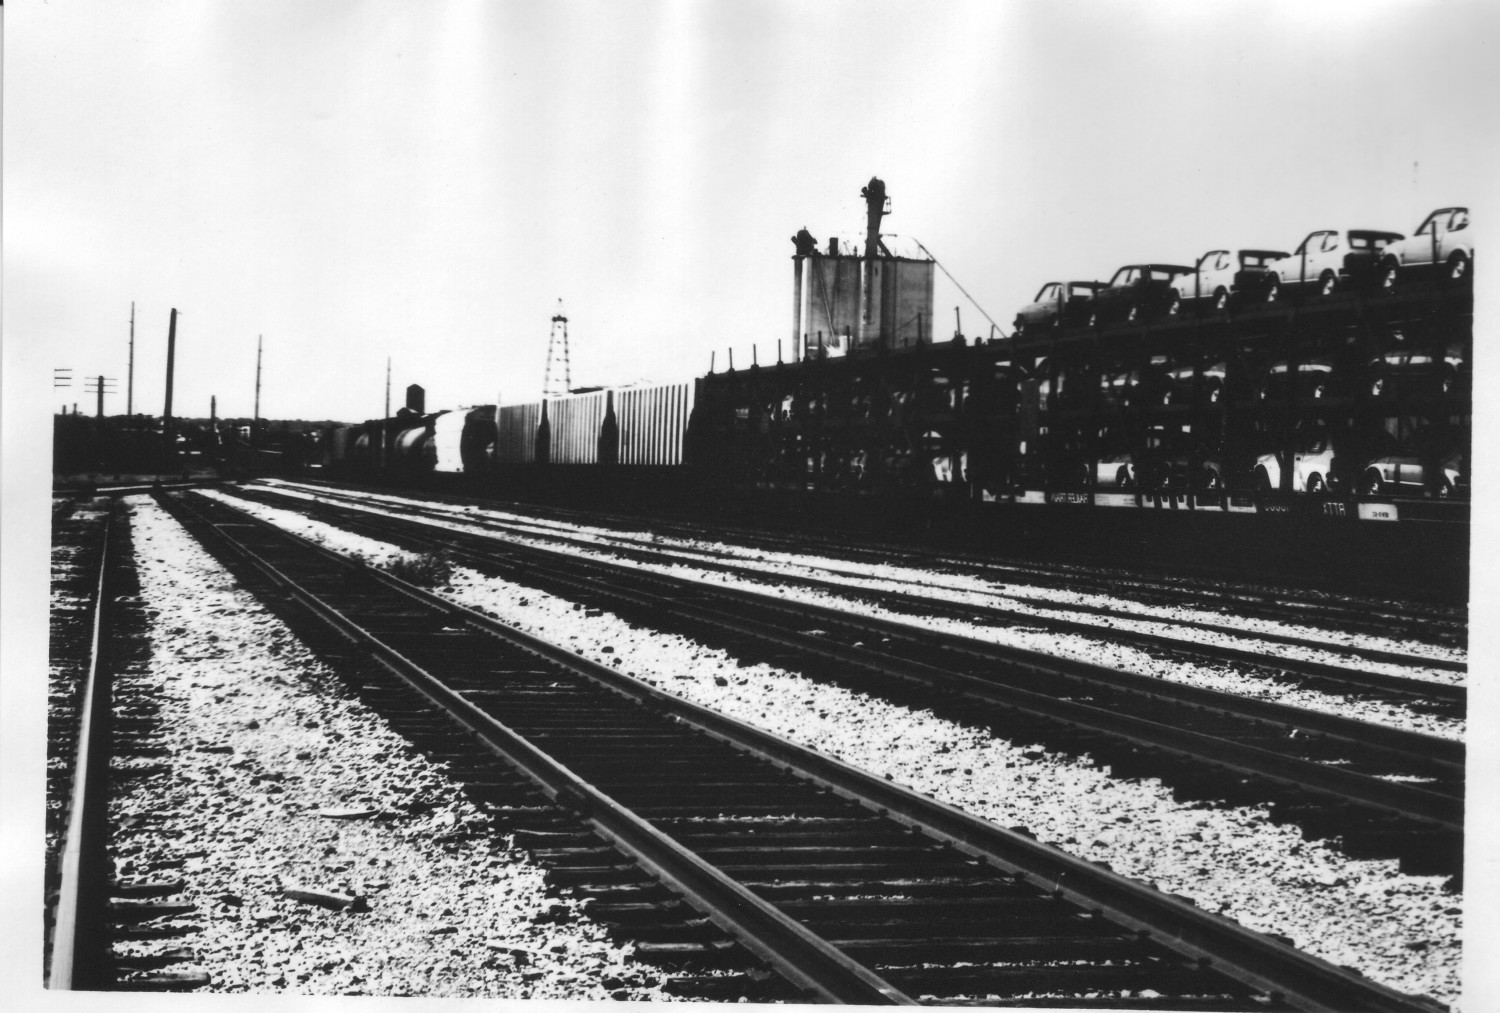 How Fort Worth was saved by the railroad